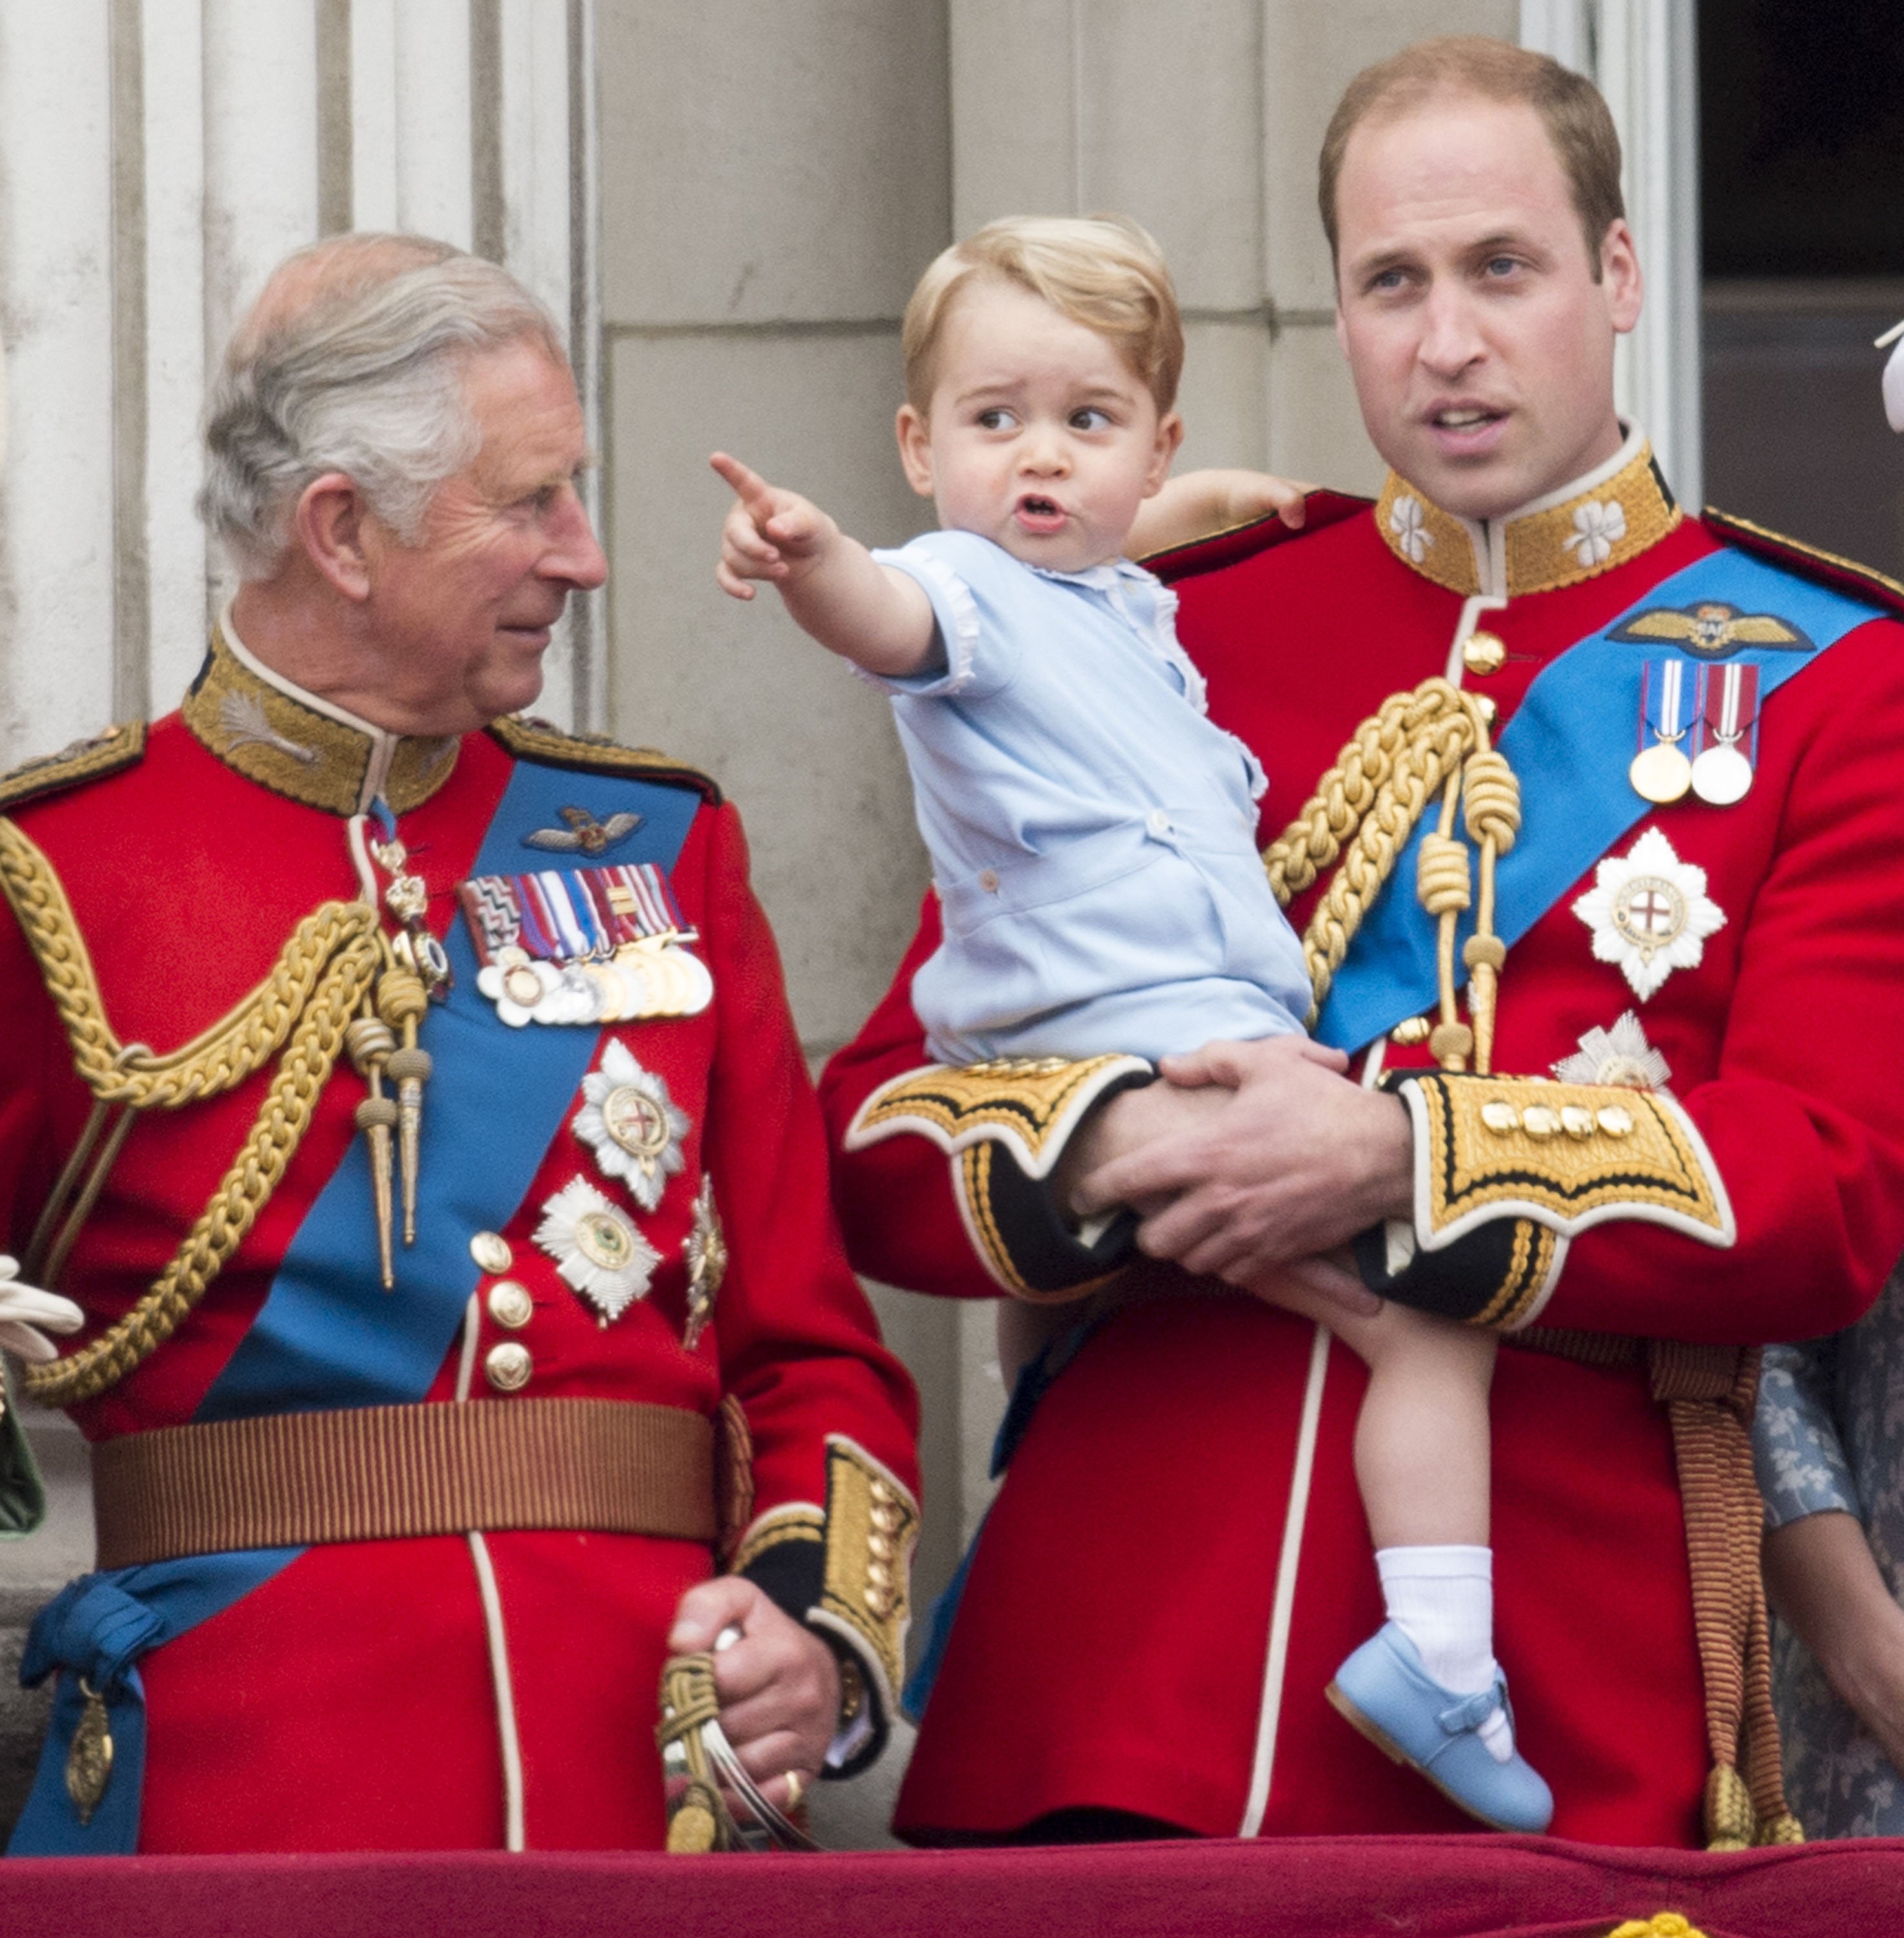 King Charles III with Prince William and Prince George of Cambridge during the annual Trooping the Colour ceremony at Buckingham Palace on June 13, 2015, in London, England. | Source: Getty Images